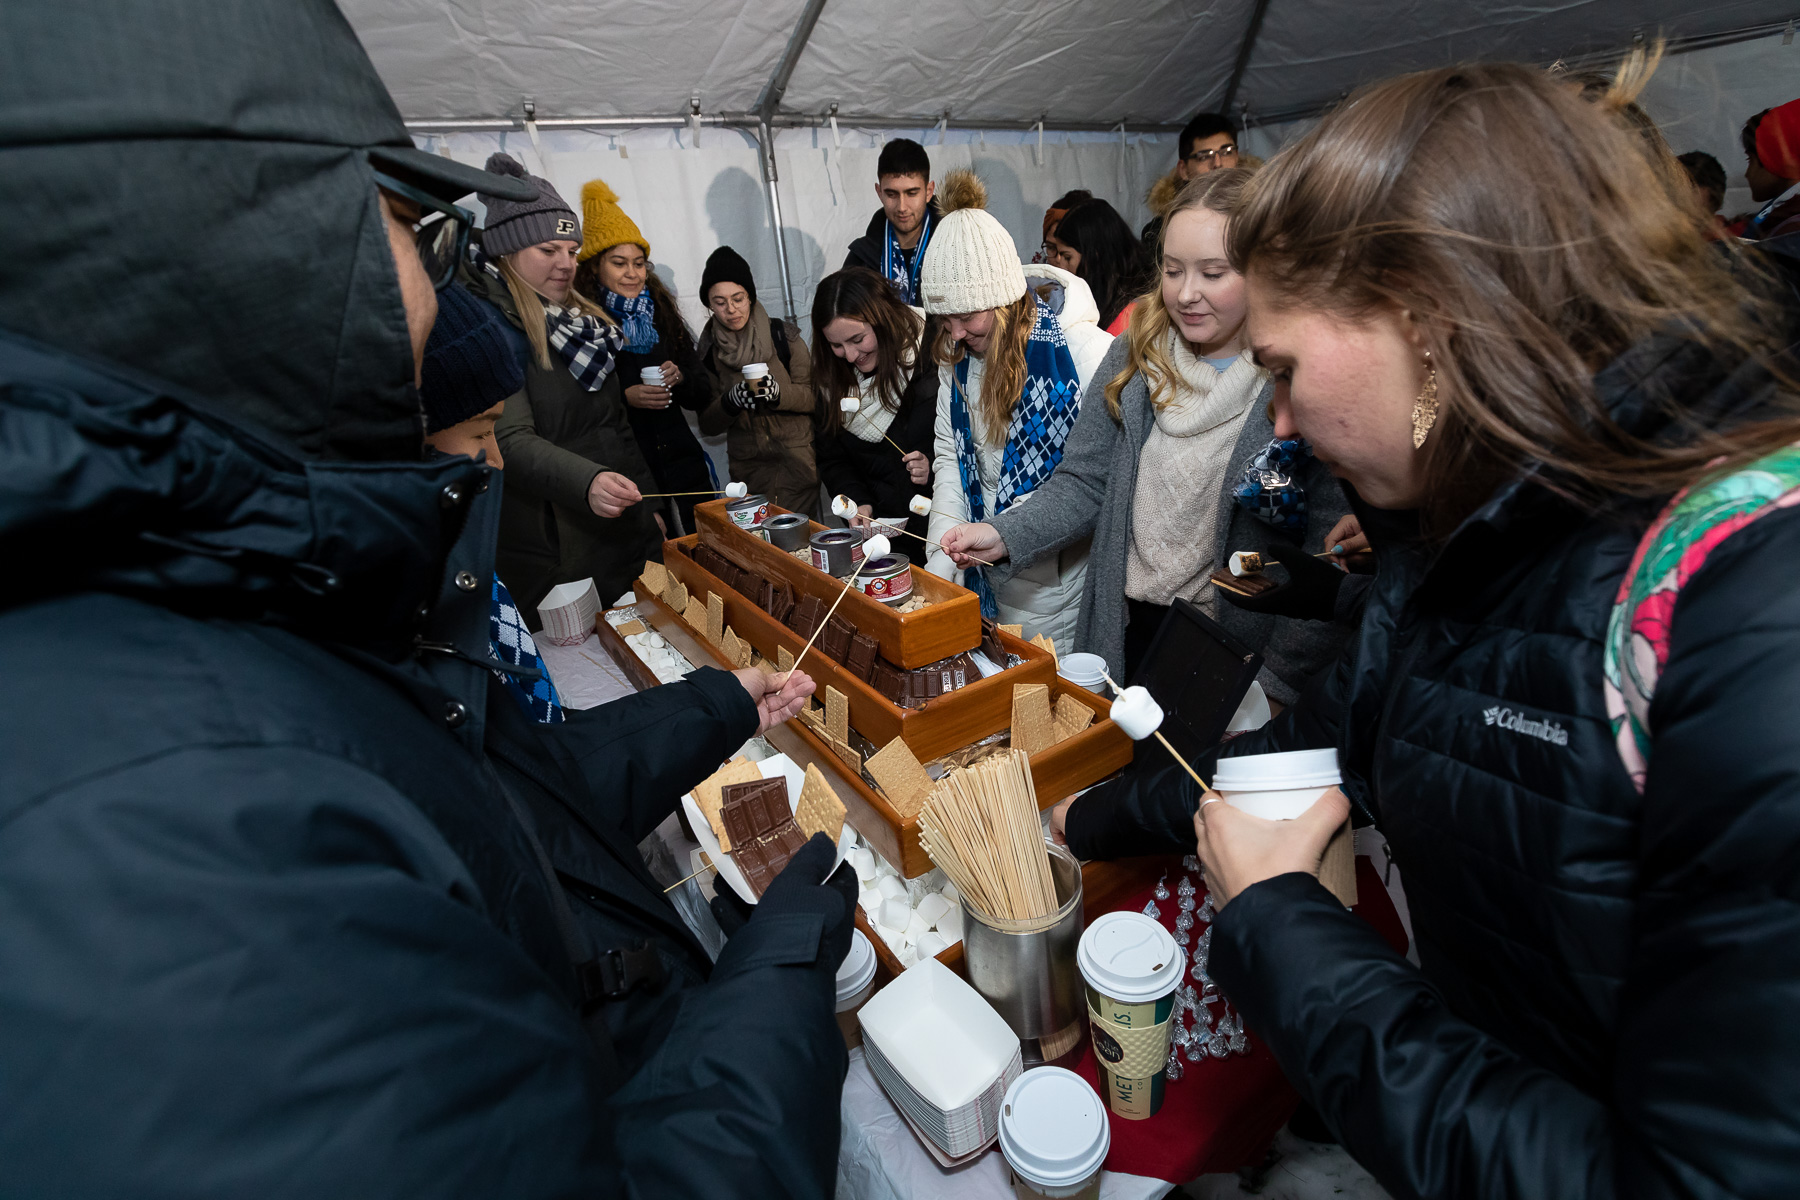 A s’mores roasting tent was available to chilly students during the second-annual Tree Lighting Ceremony. (DePaul University/Jeff Carrion)